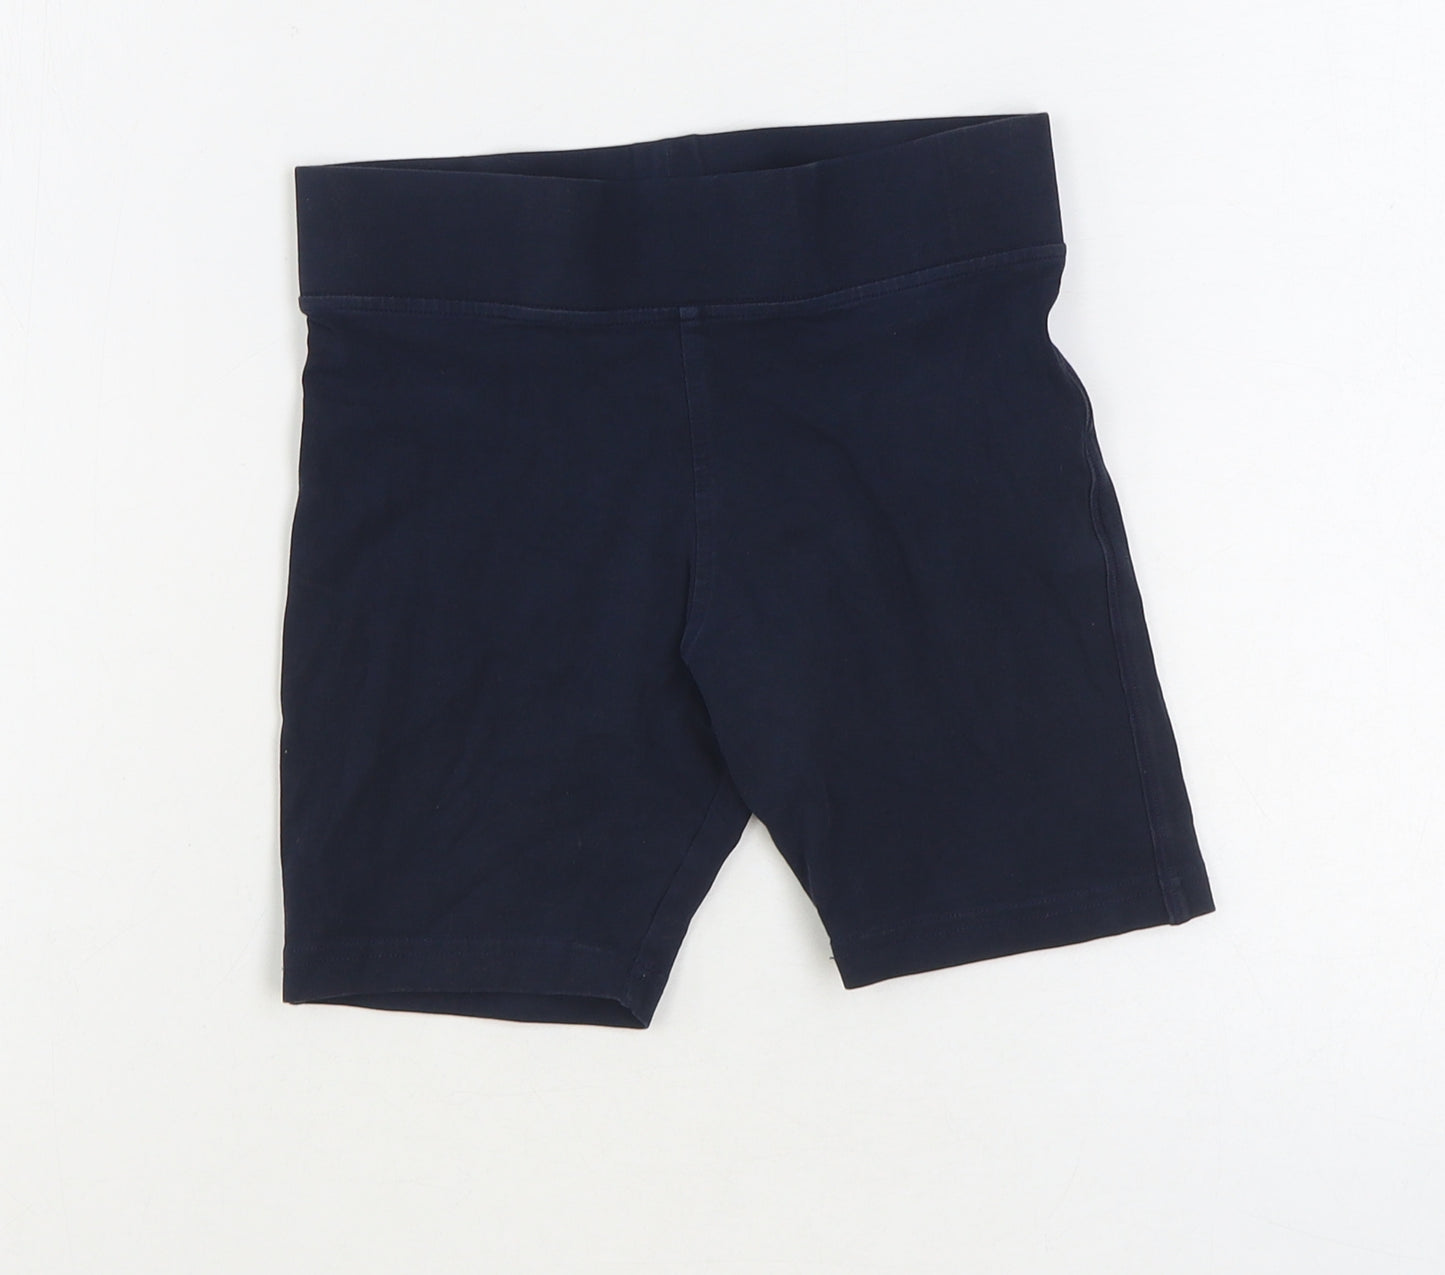 Marks and Spencer Girls Blue Polyester Compression Shorts Size 8-9 Years Regular